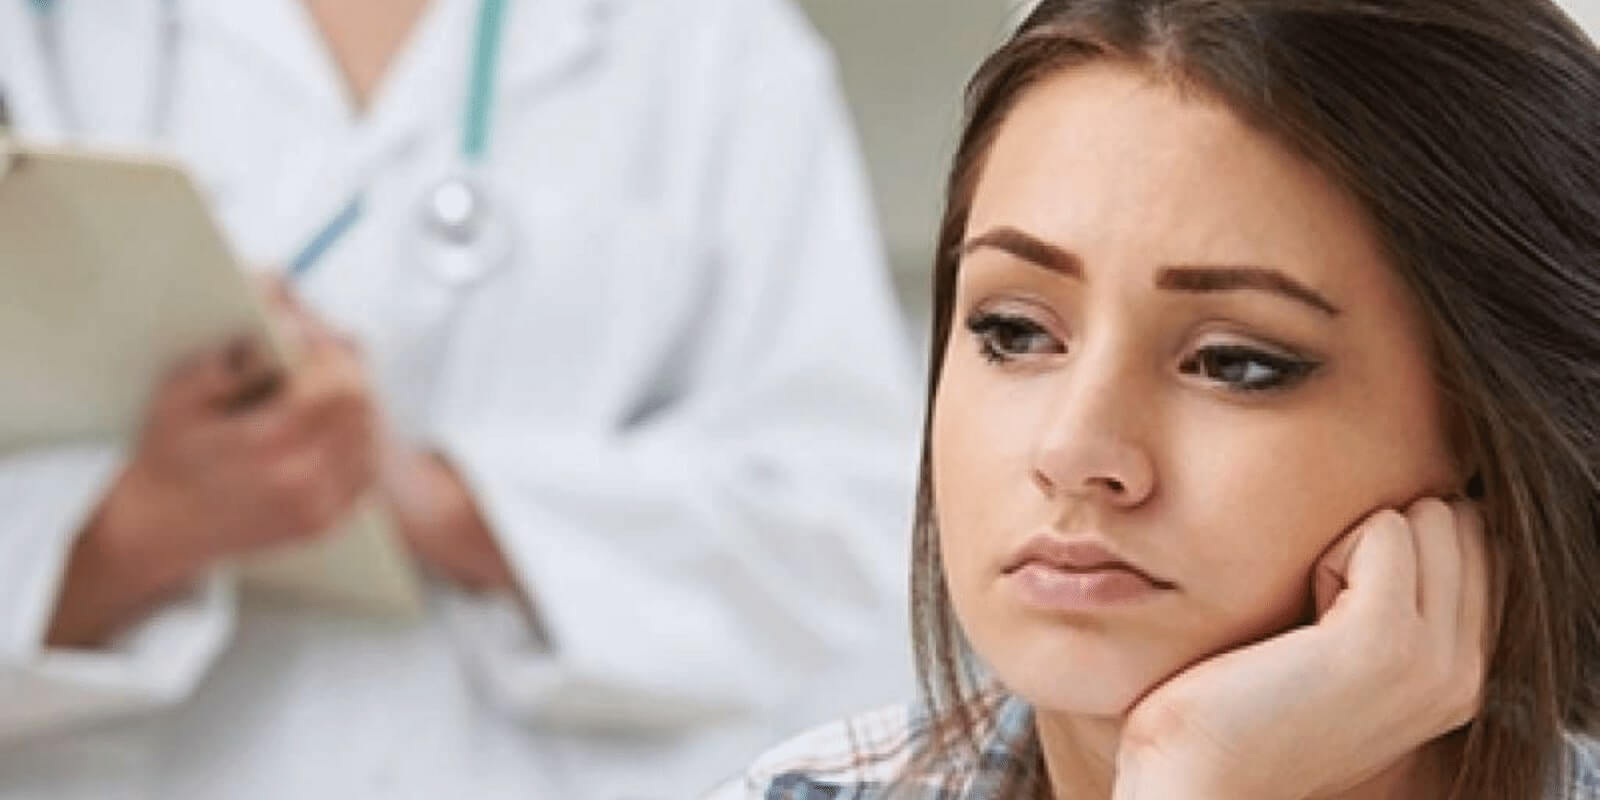 A teen looking concerned in front of a doctor